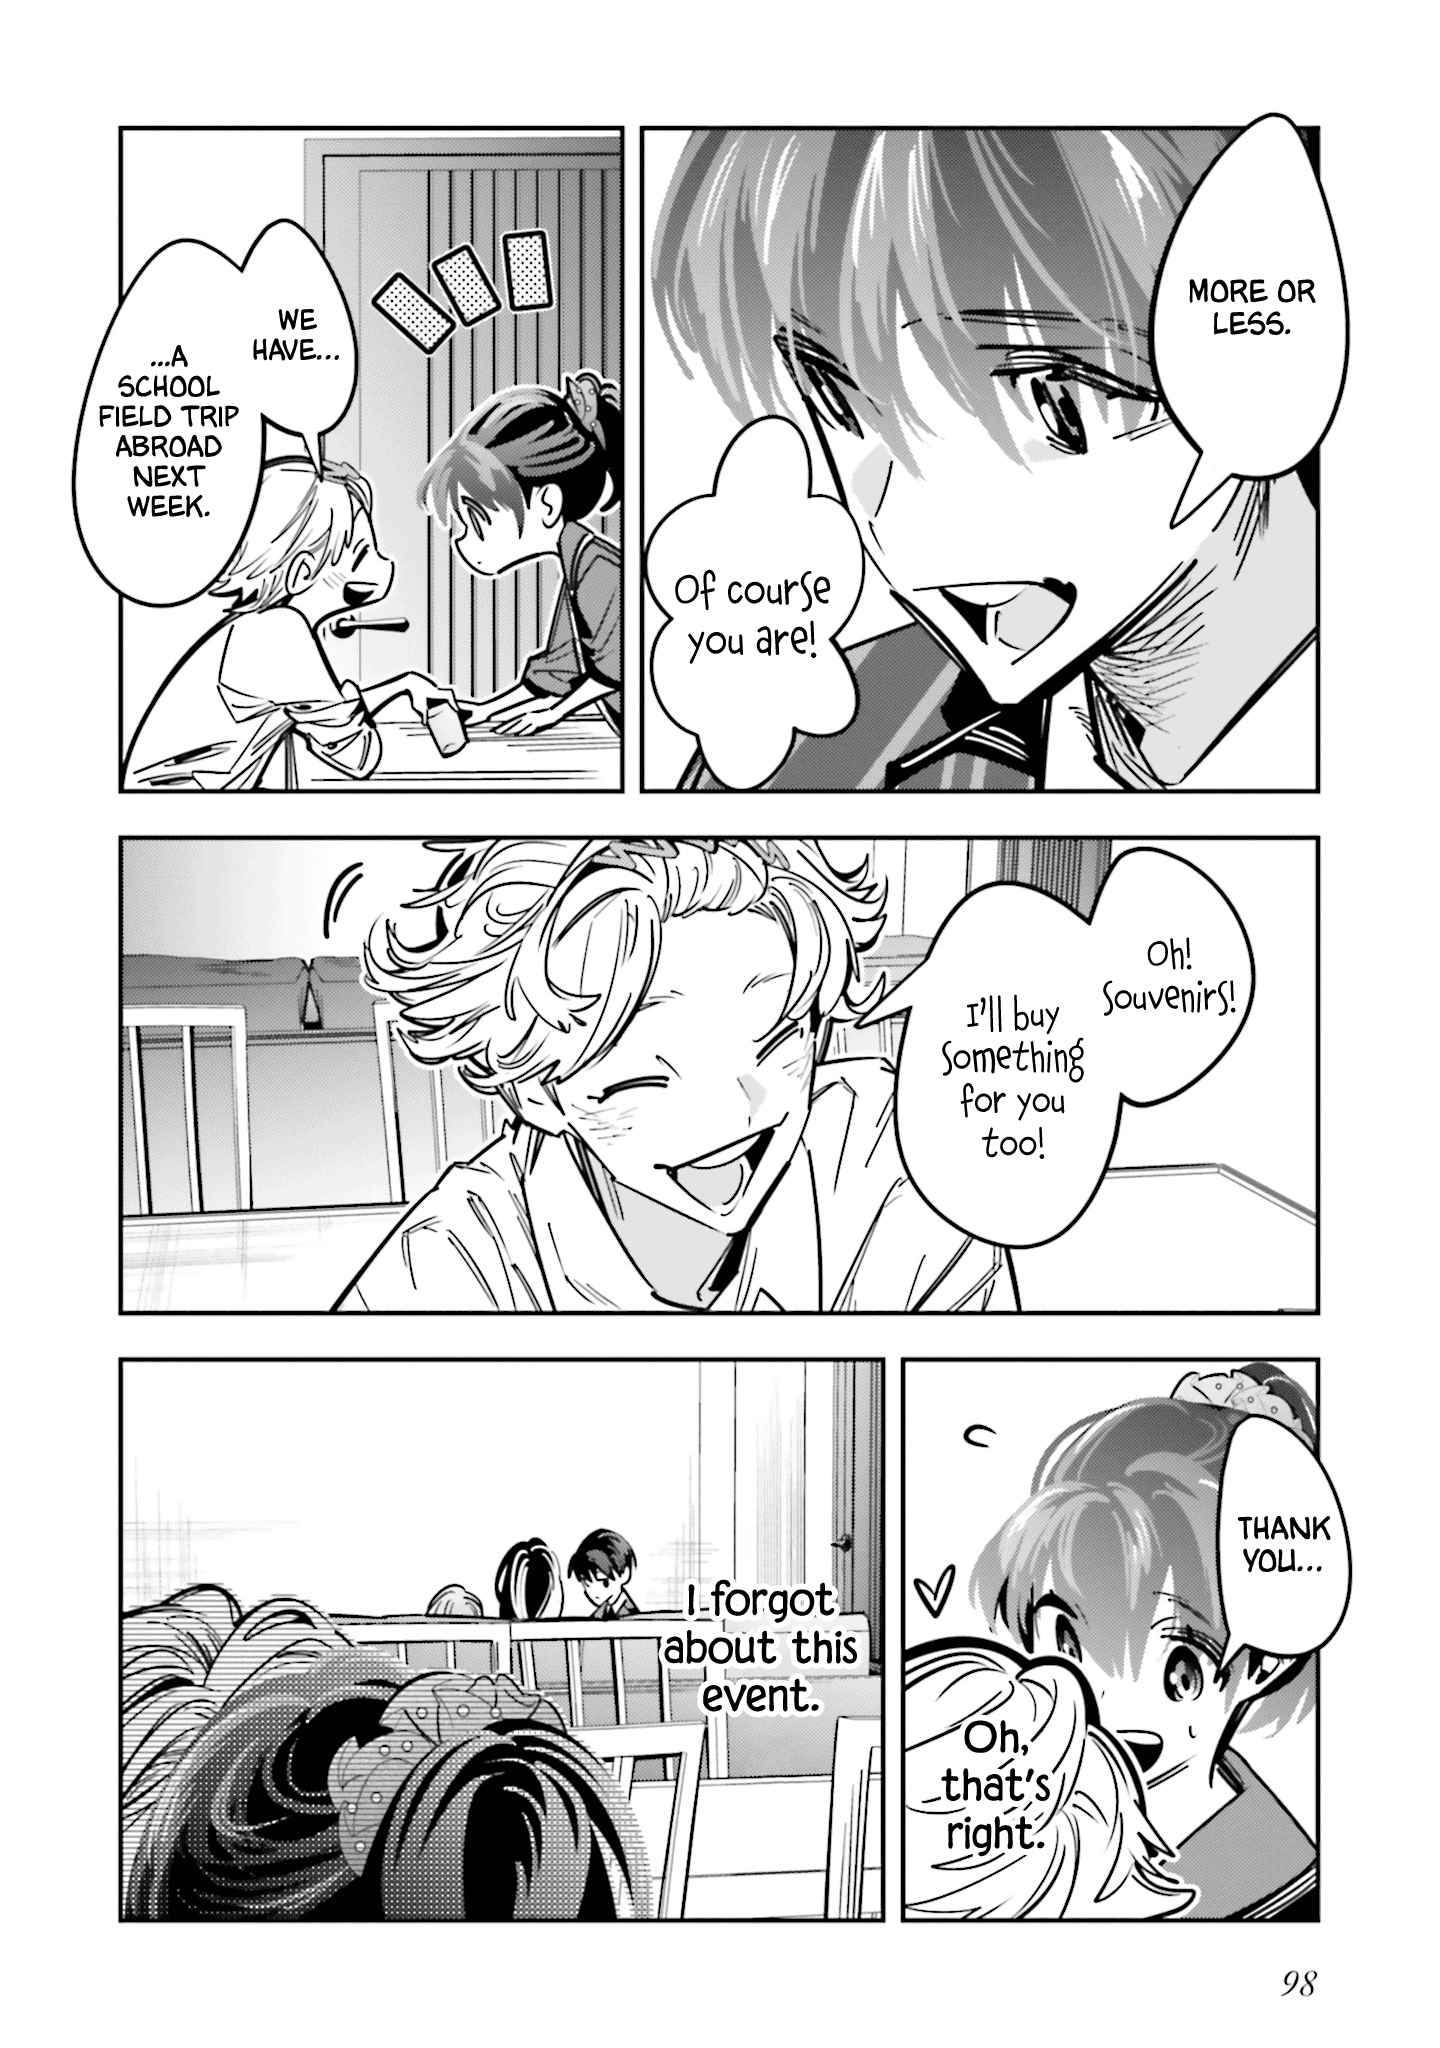 I Reincarnated As The Little Sister Of A Death Game Manga’S Murd3R Mastermind And Failed - chapter 8 - #2